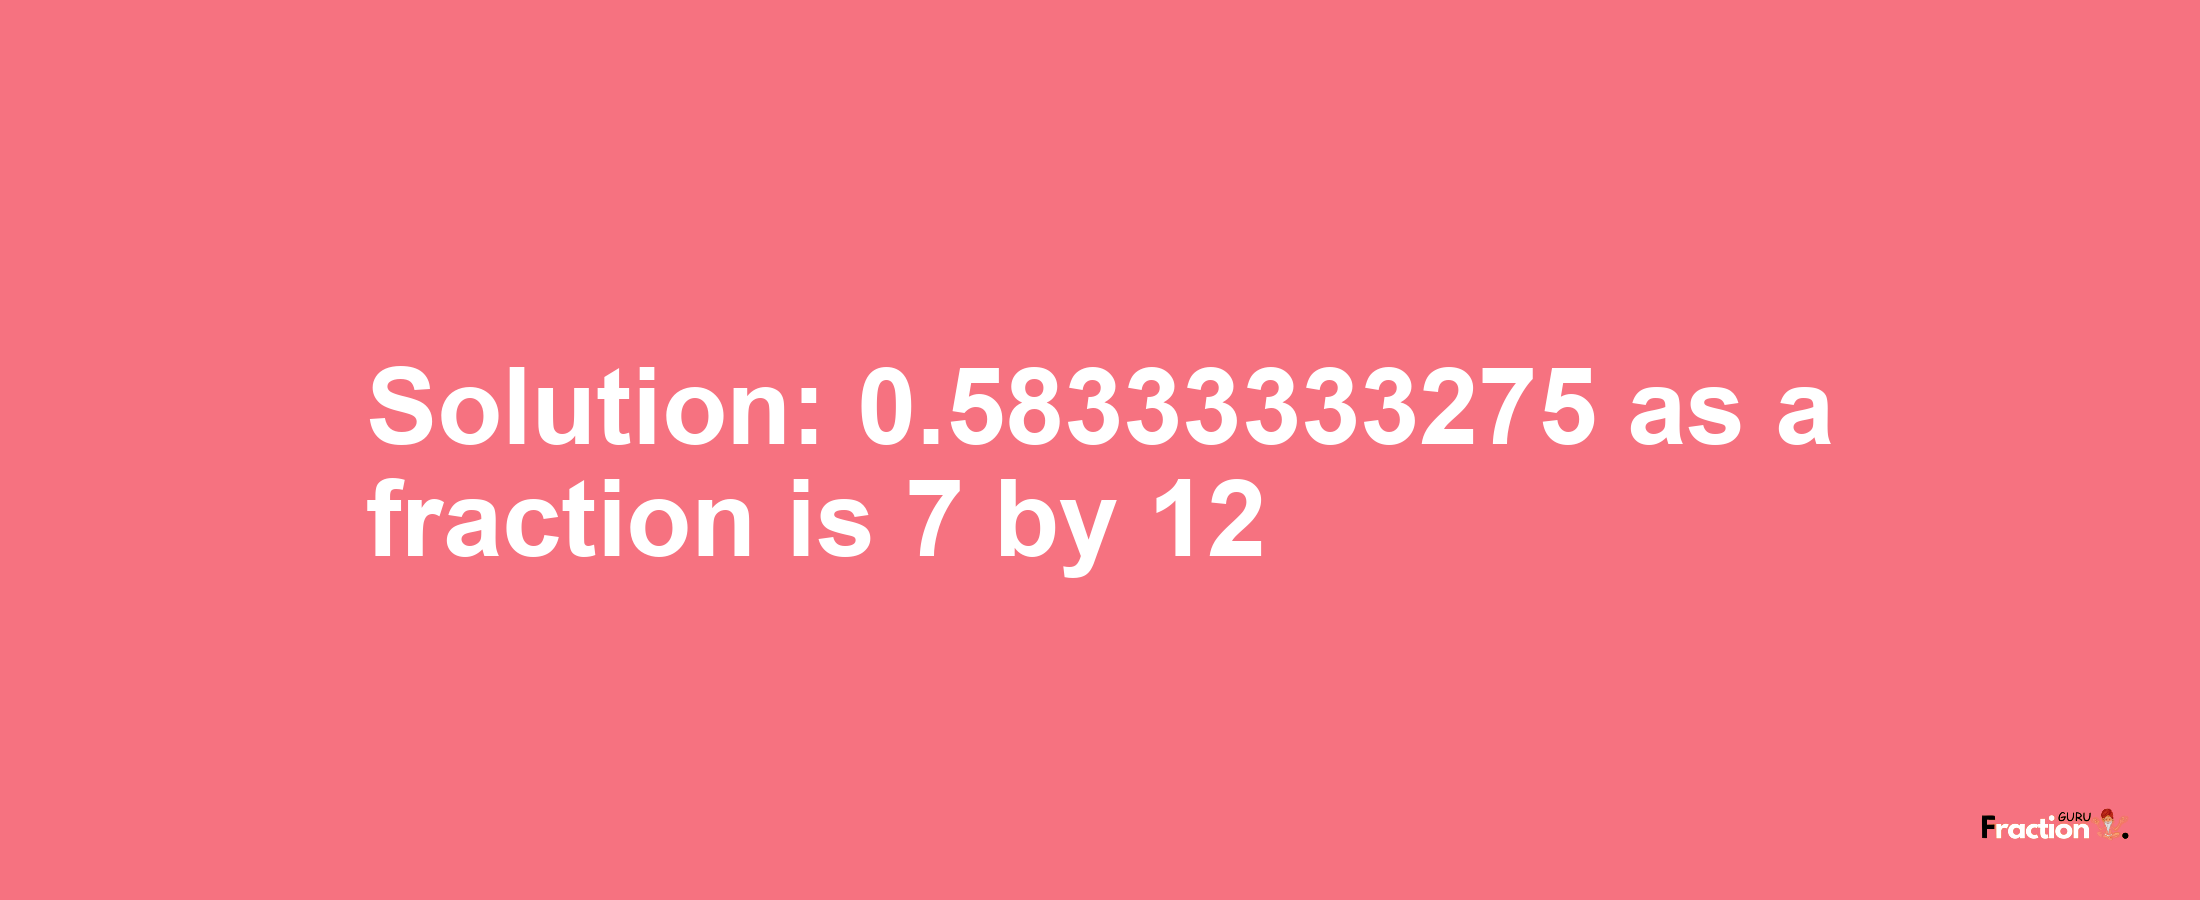 Solution:0.58333333275 as a fraction is 7/12